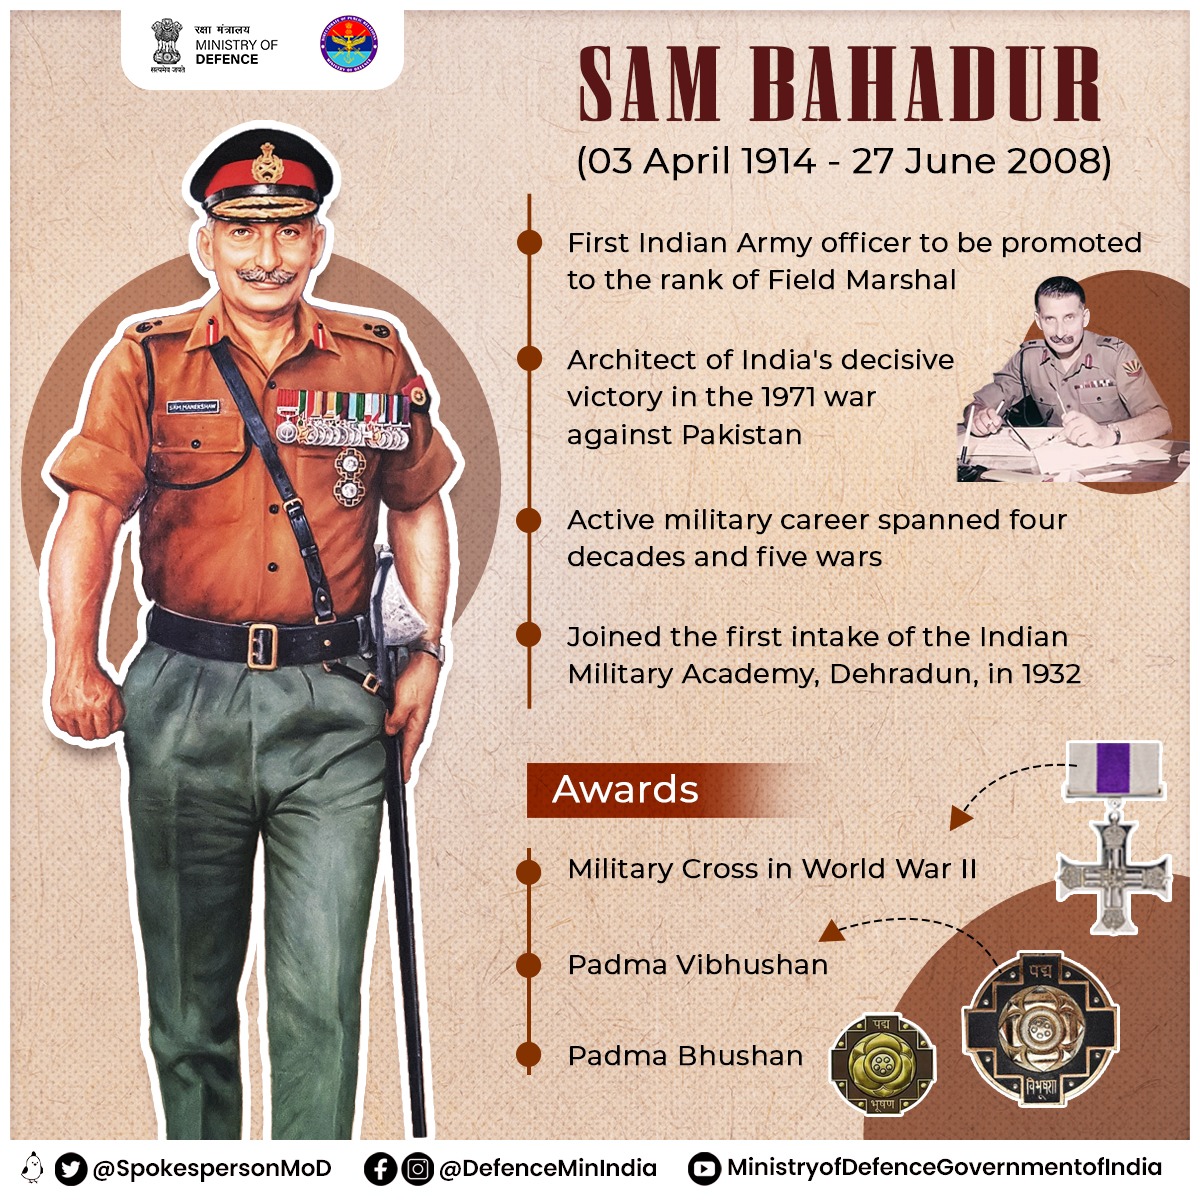 Remembering one of the greatest military leaders & Soldiers' General Field Marshal SHFJ Manekshaw on his 110th birth anniversary. Popularly known as Sam Bahadur, he was the architect of India’s decisive victory in the 1971 War against Pakistan. @rajnathsingh @giridhararamane